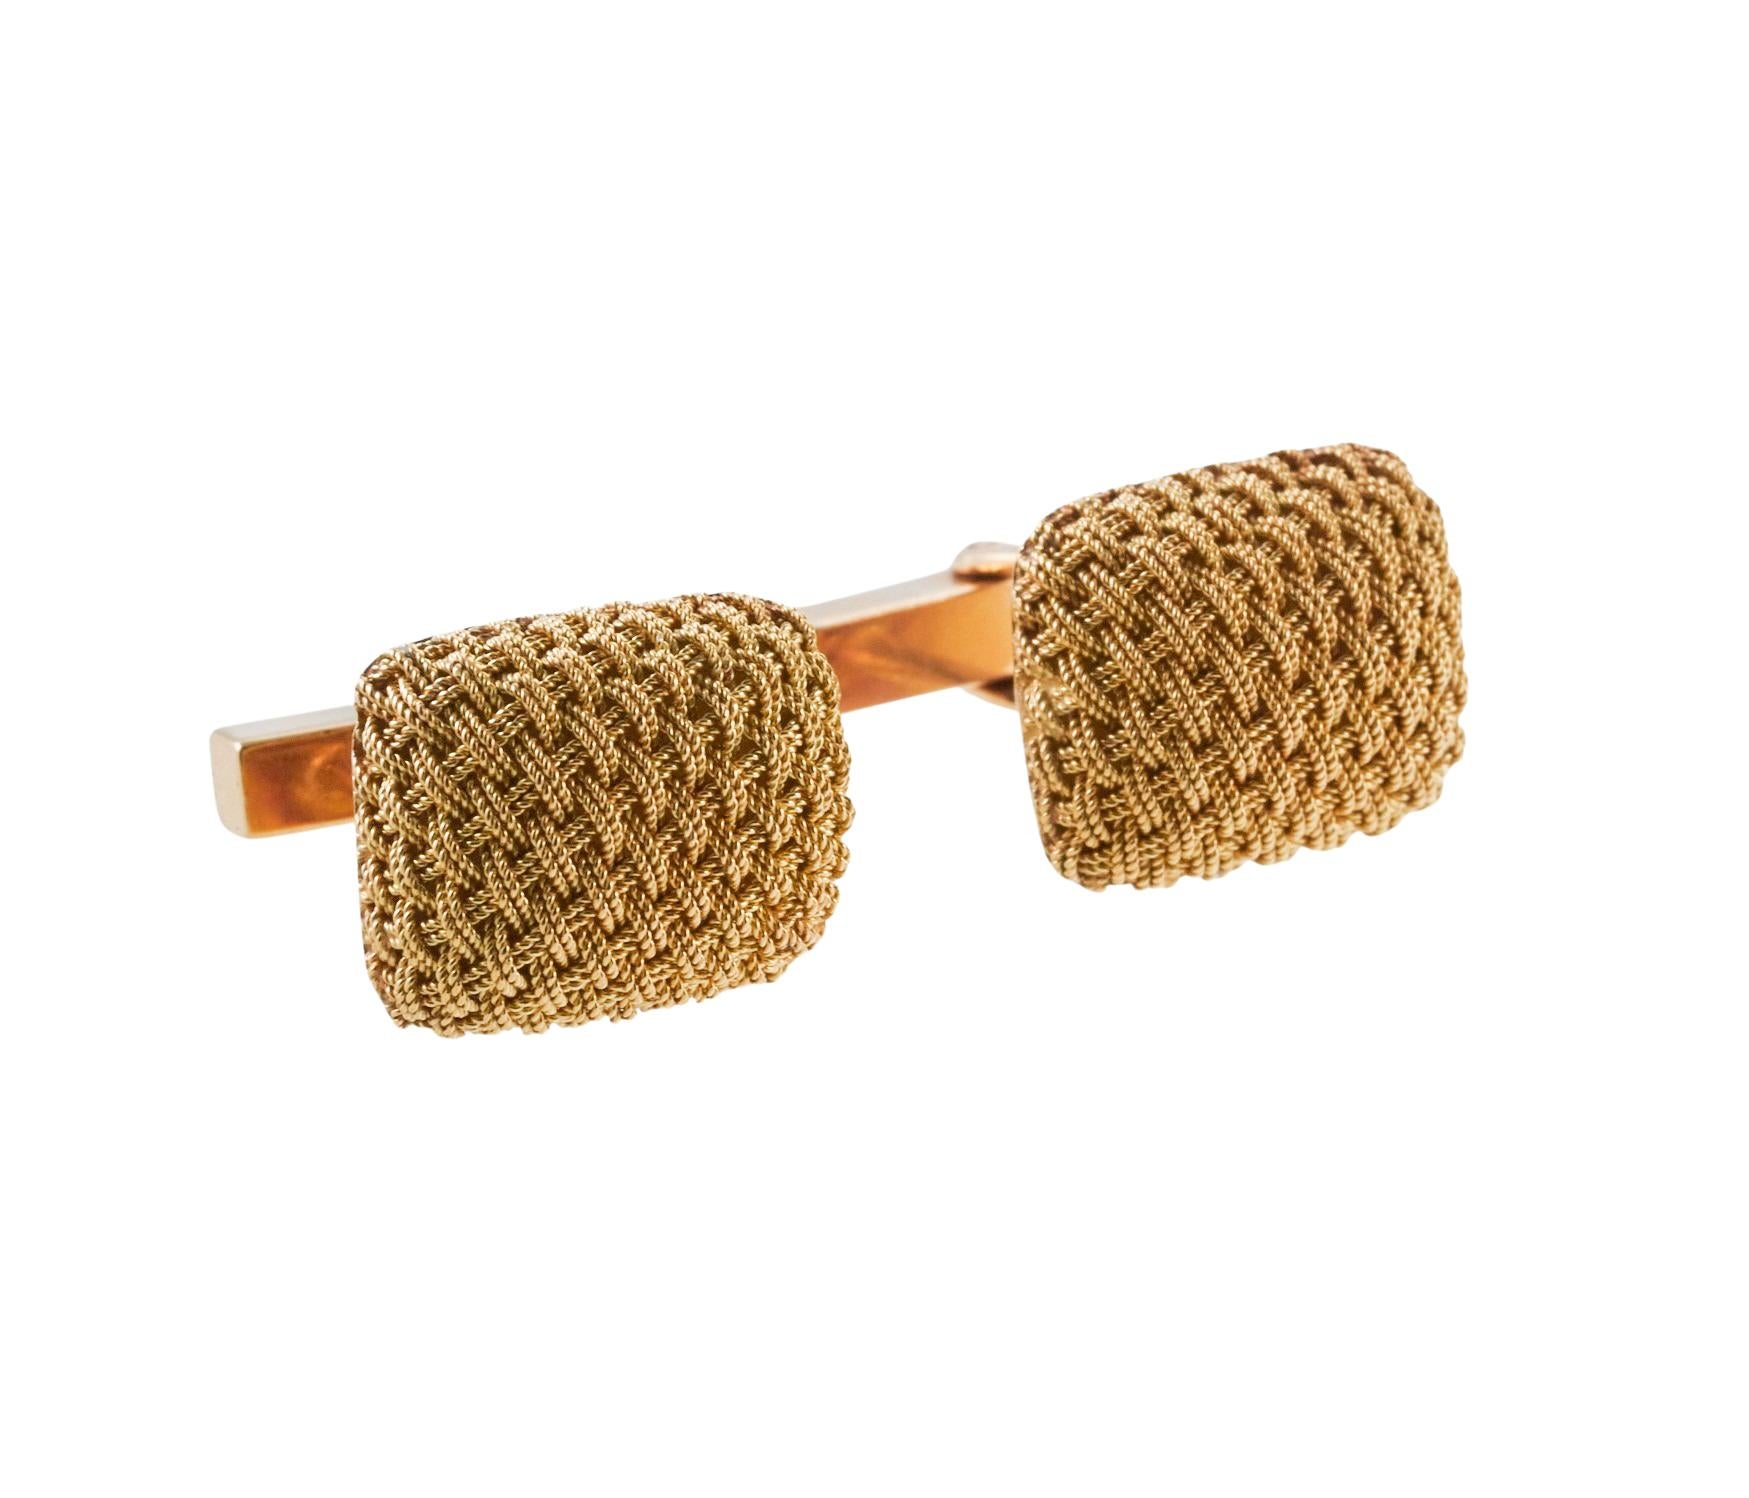 Pair of vintage, circa 1960s 14k gold cufflinks, featuring woven 